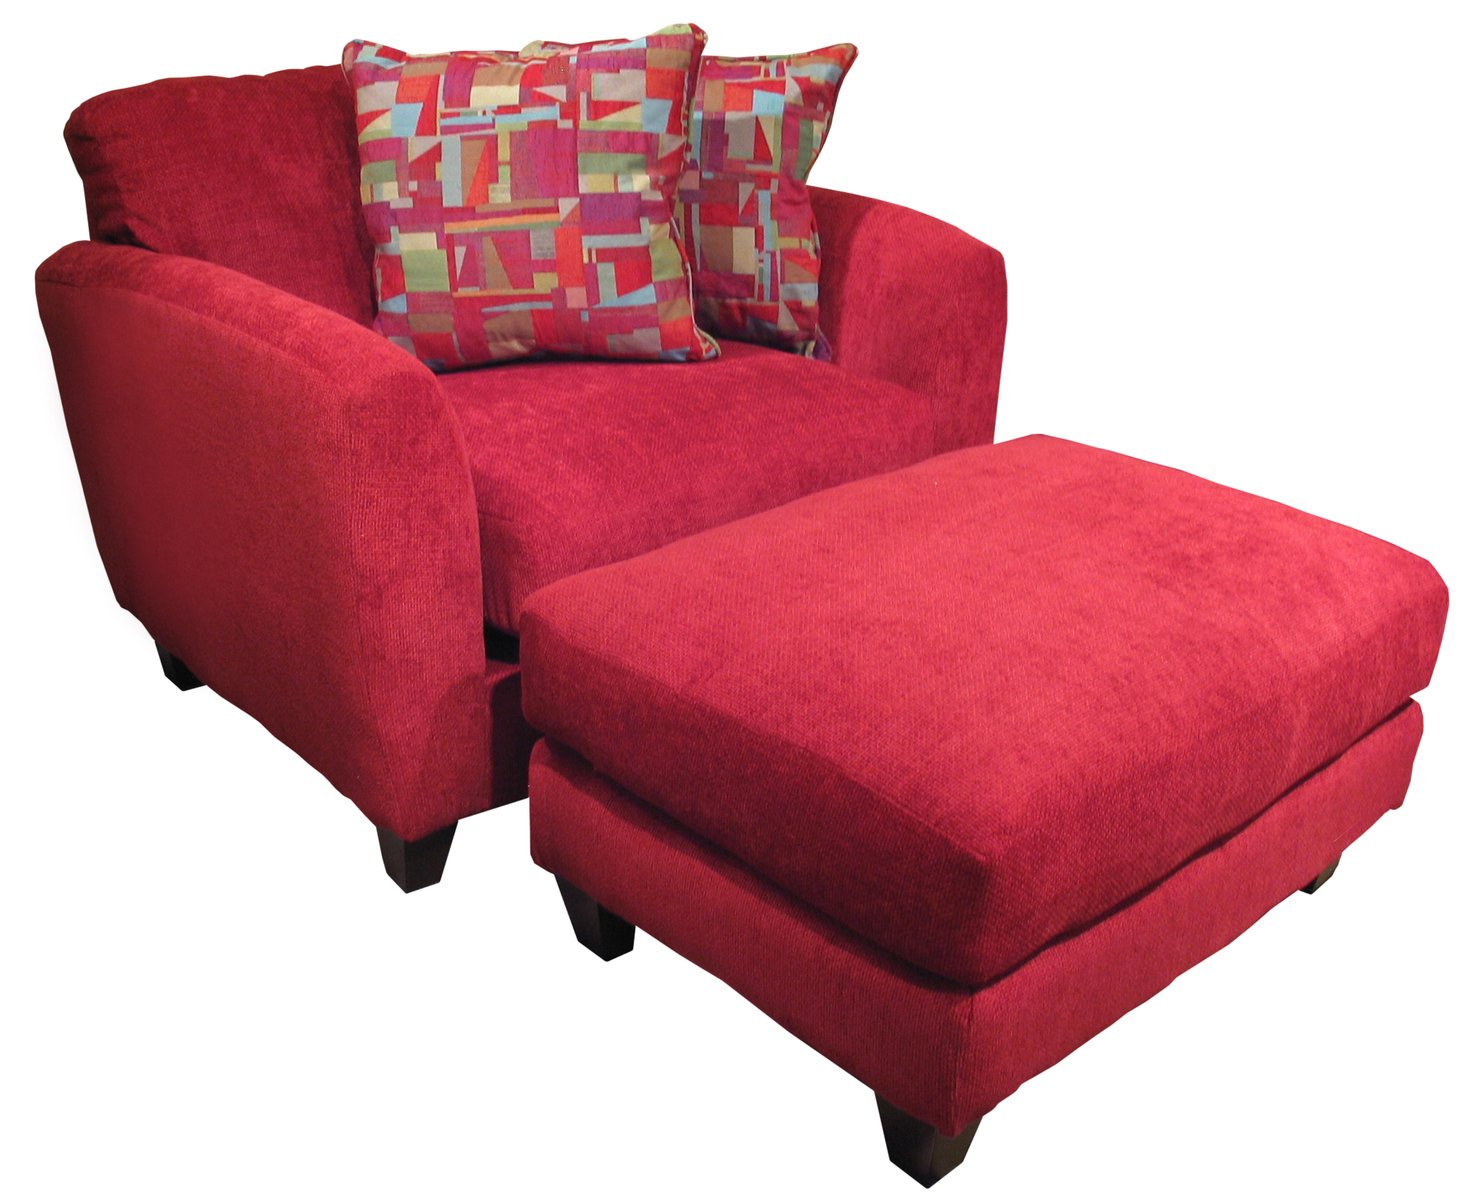 a red chair with a cushion and ottoman